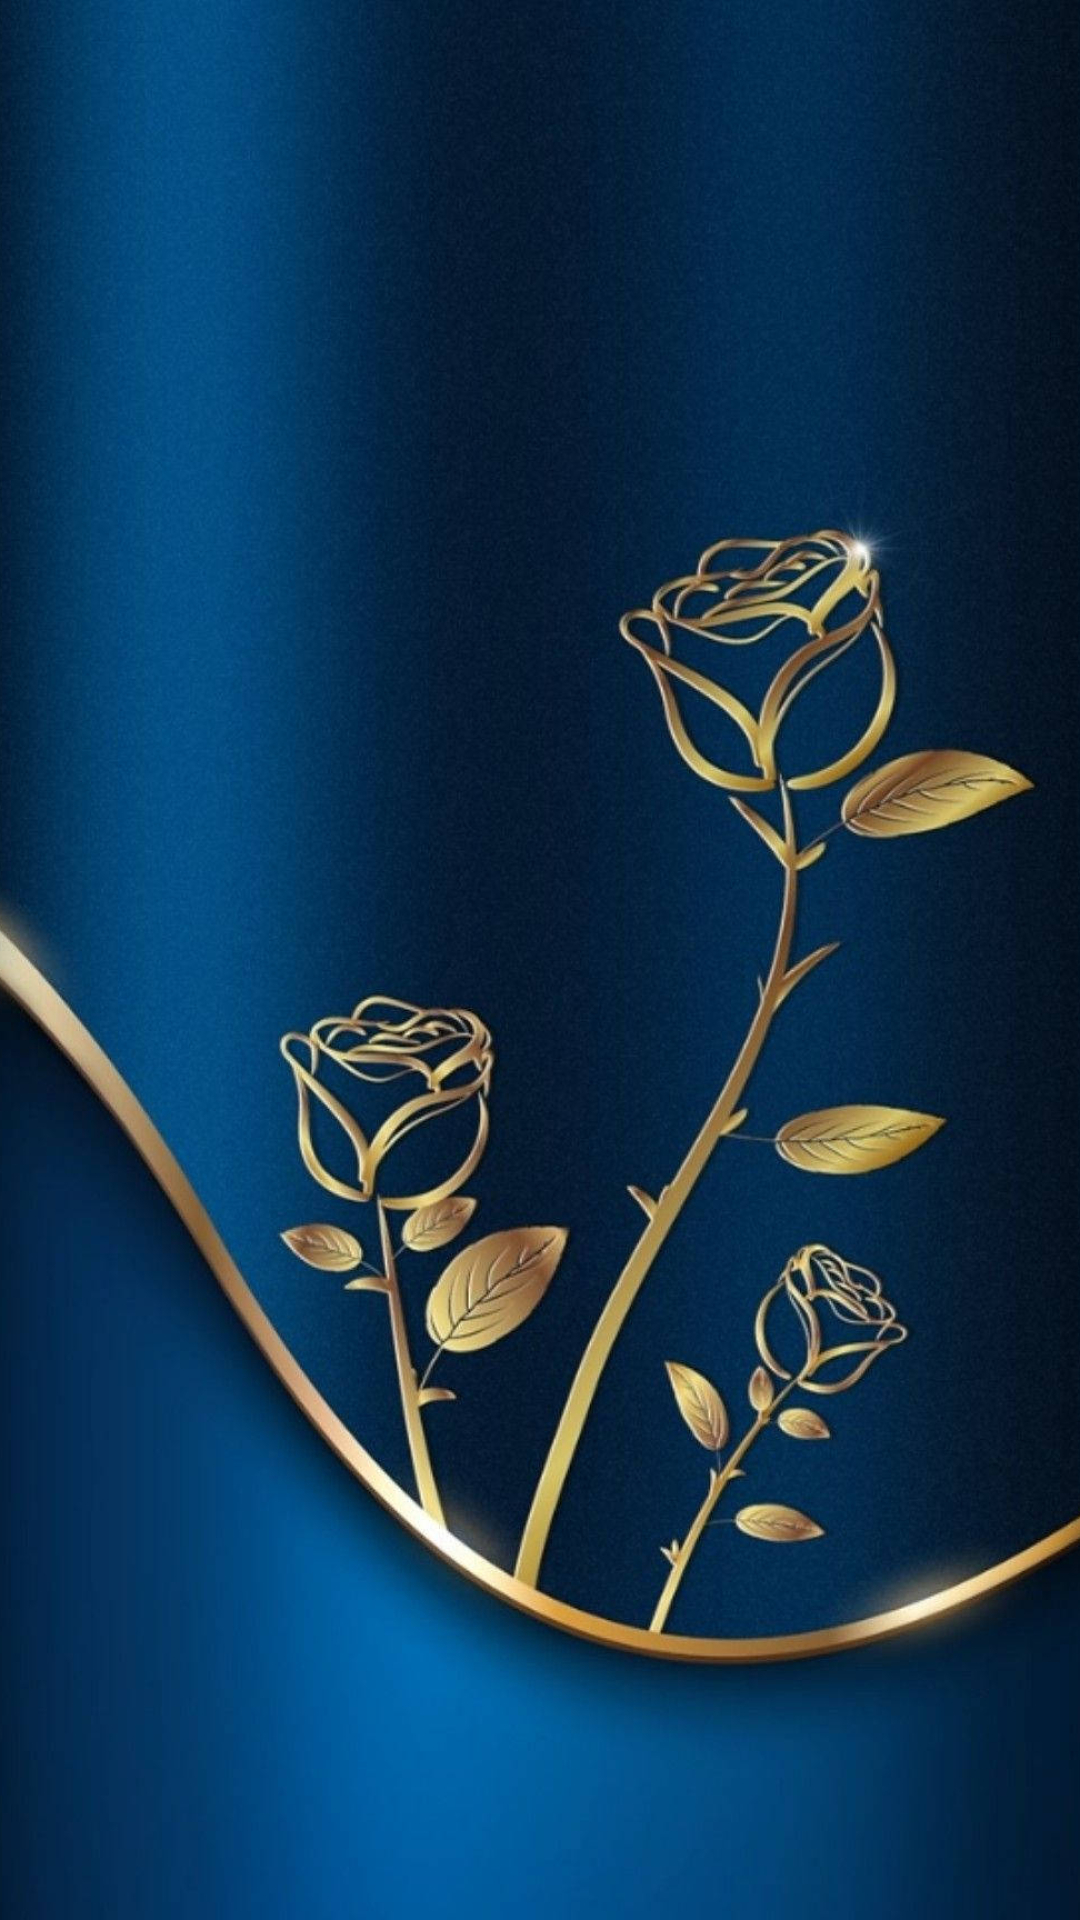 1080x1920 Download Blue And Gold Rose Wallpaper